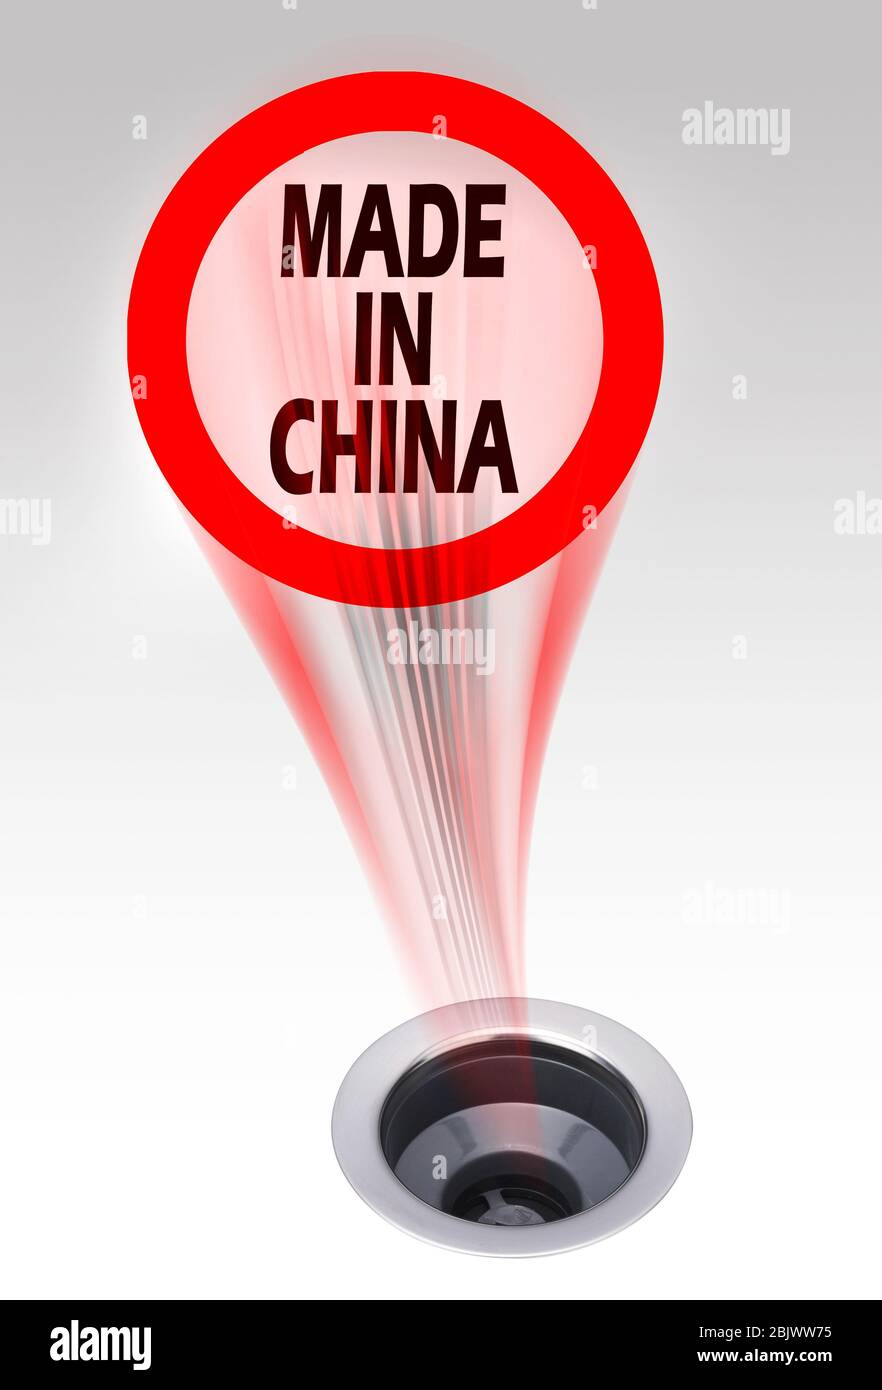 Made in China down the the drain. Stock Photo